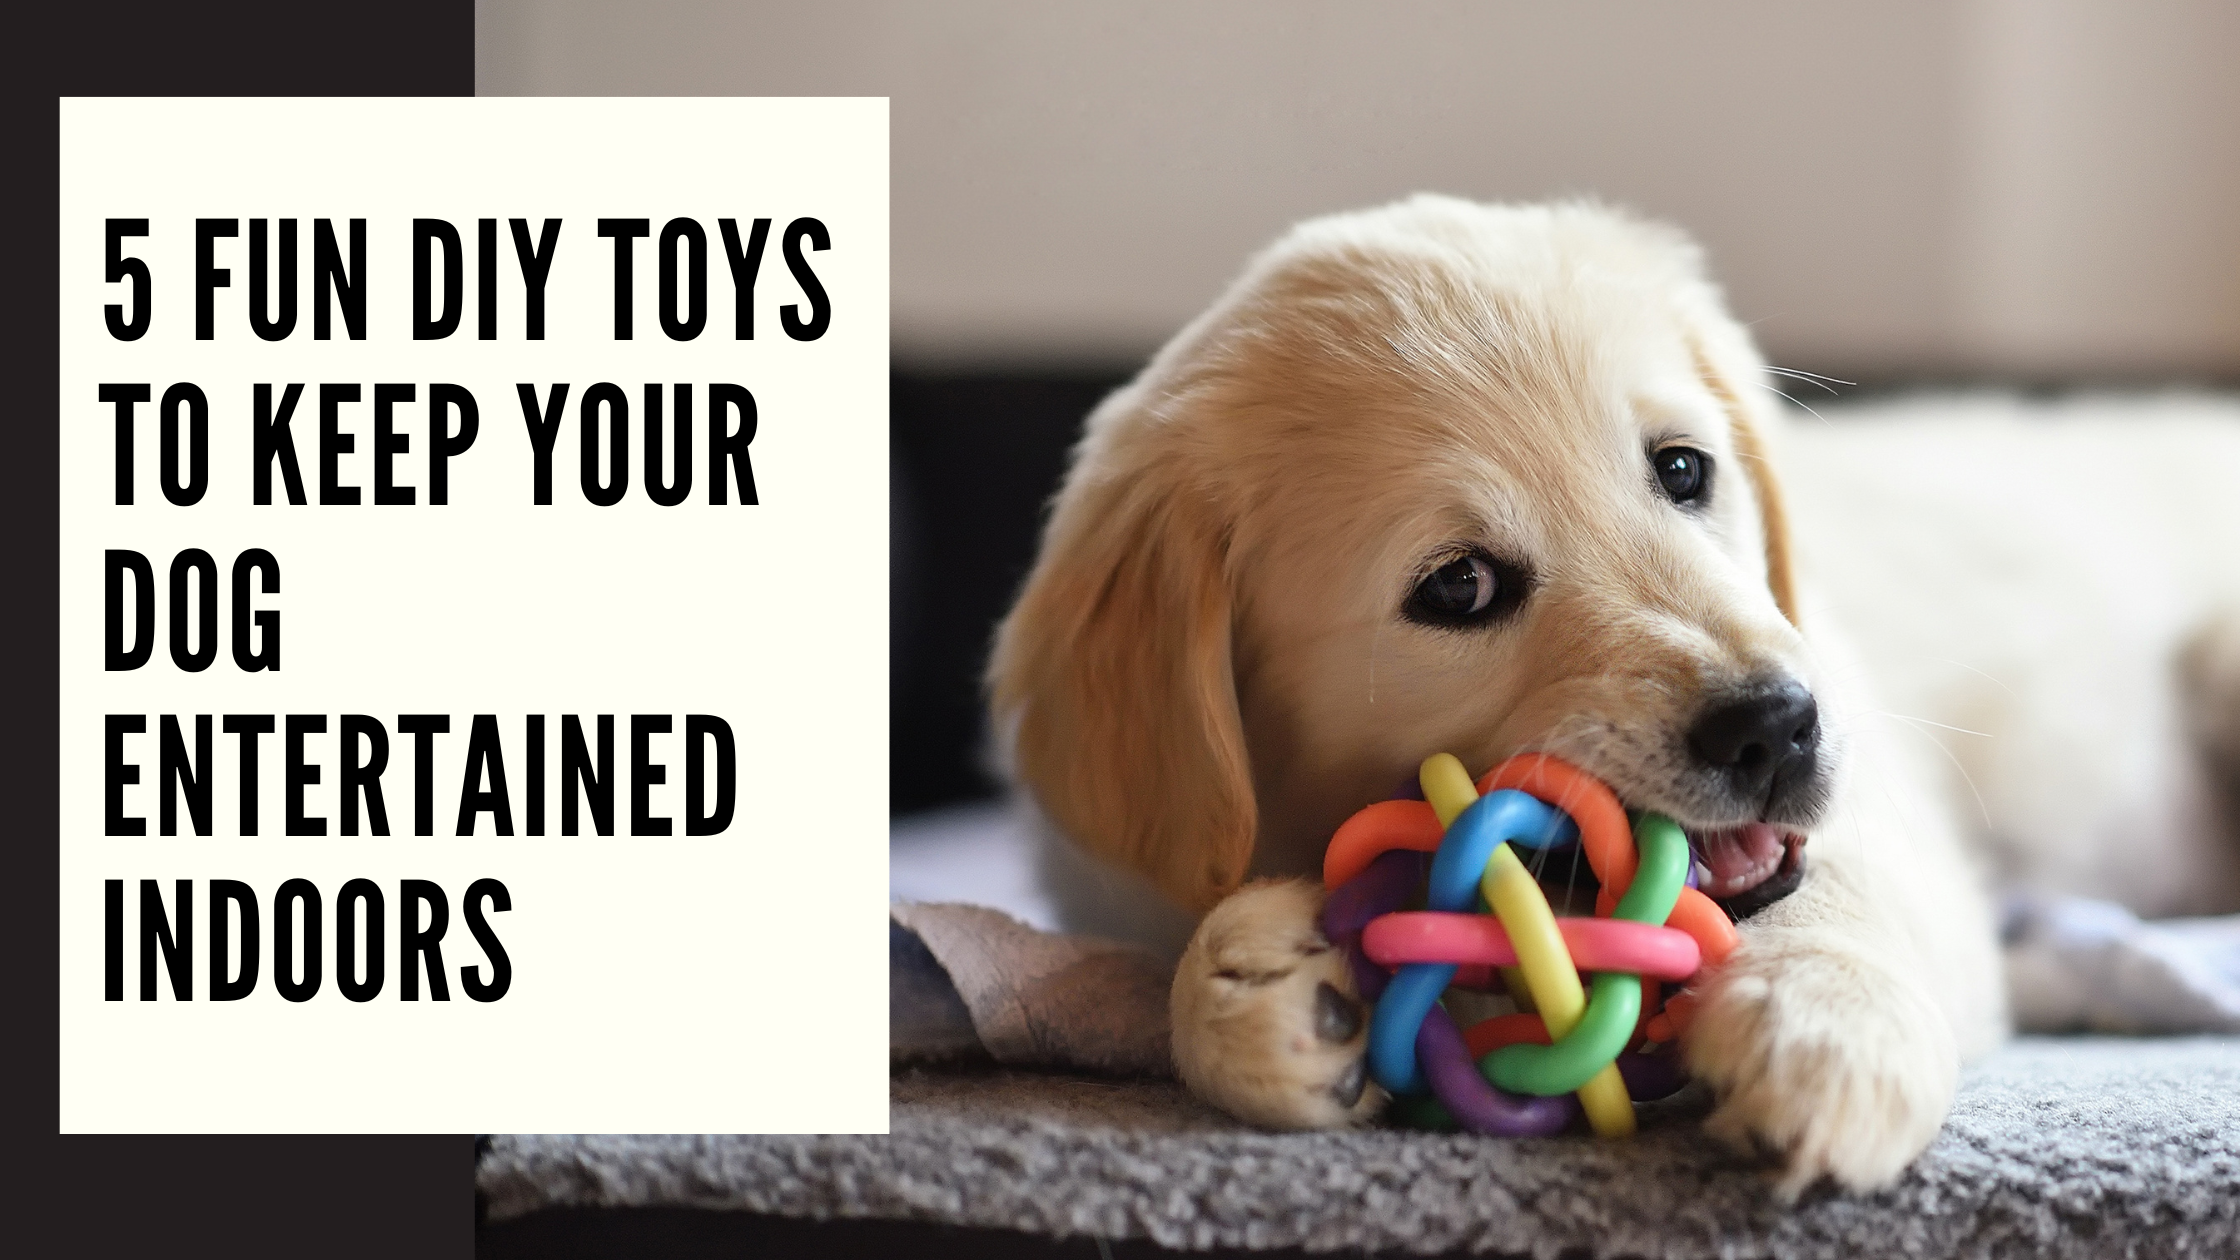 5 Fun DIY Toys to Keep Your Dog Entertained Indoors